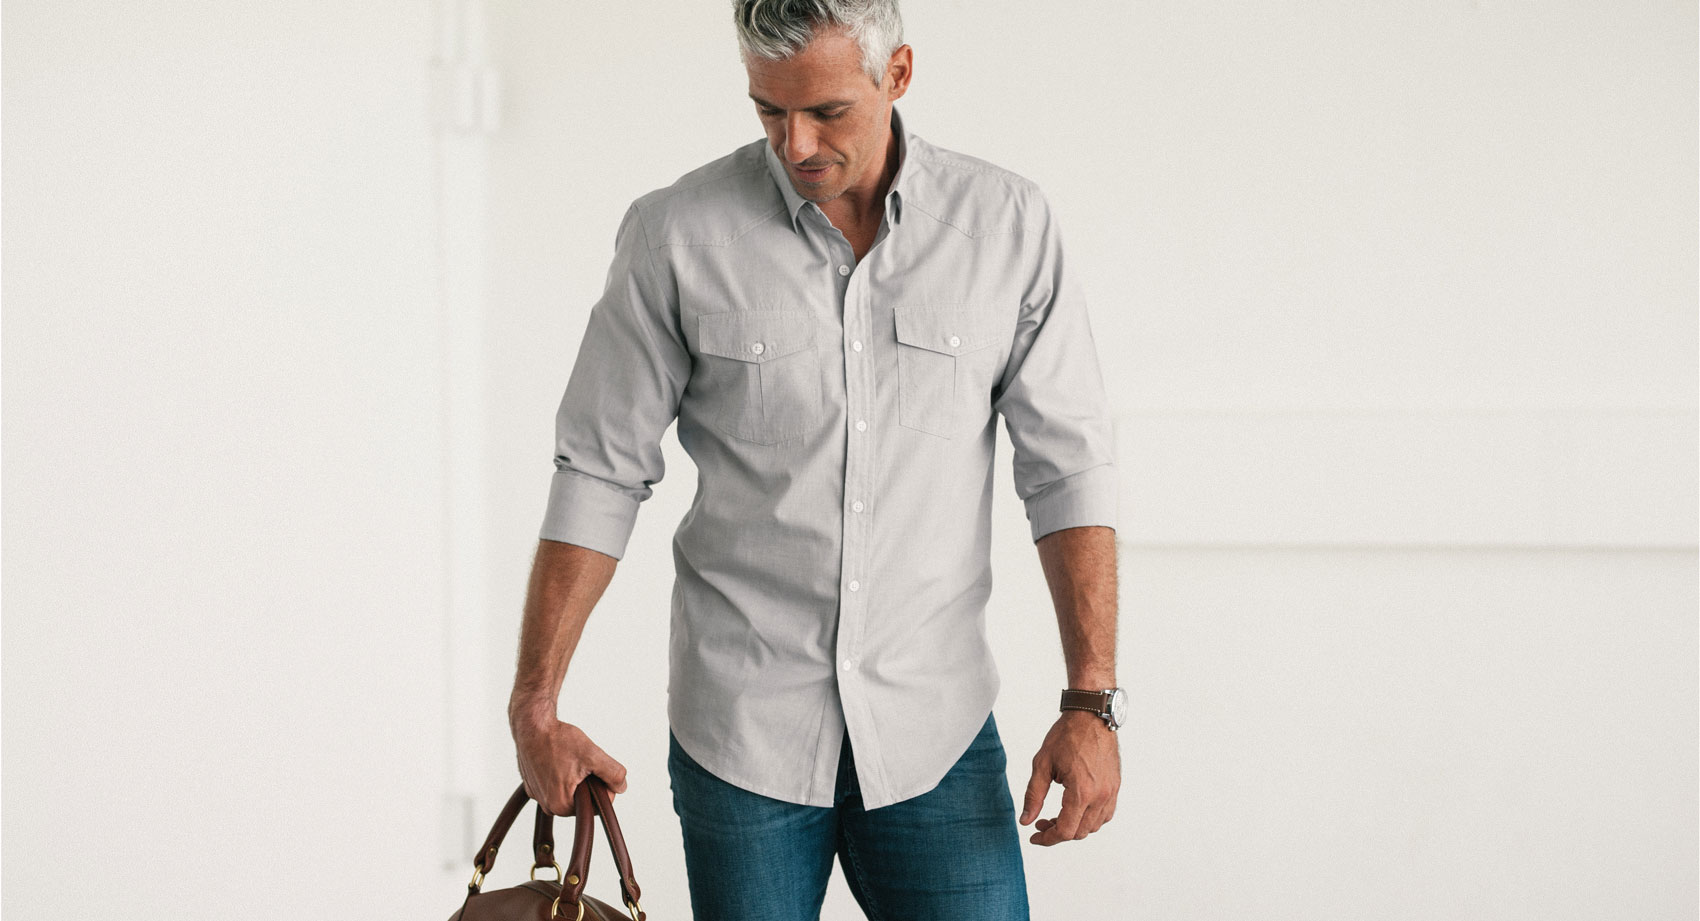 This Batch Shirt Is the Perfect Blend of Rugged and Refined